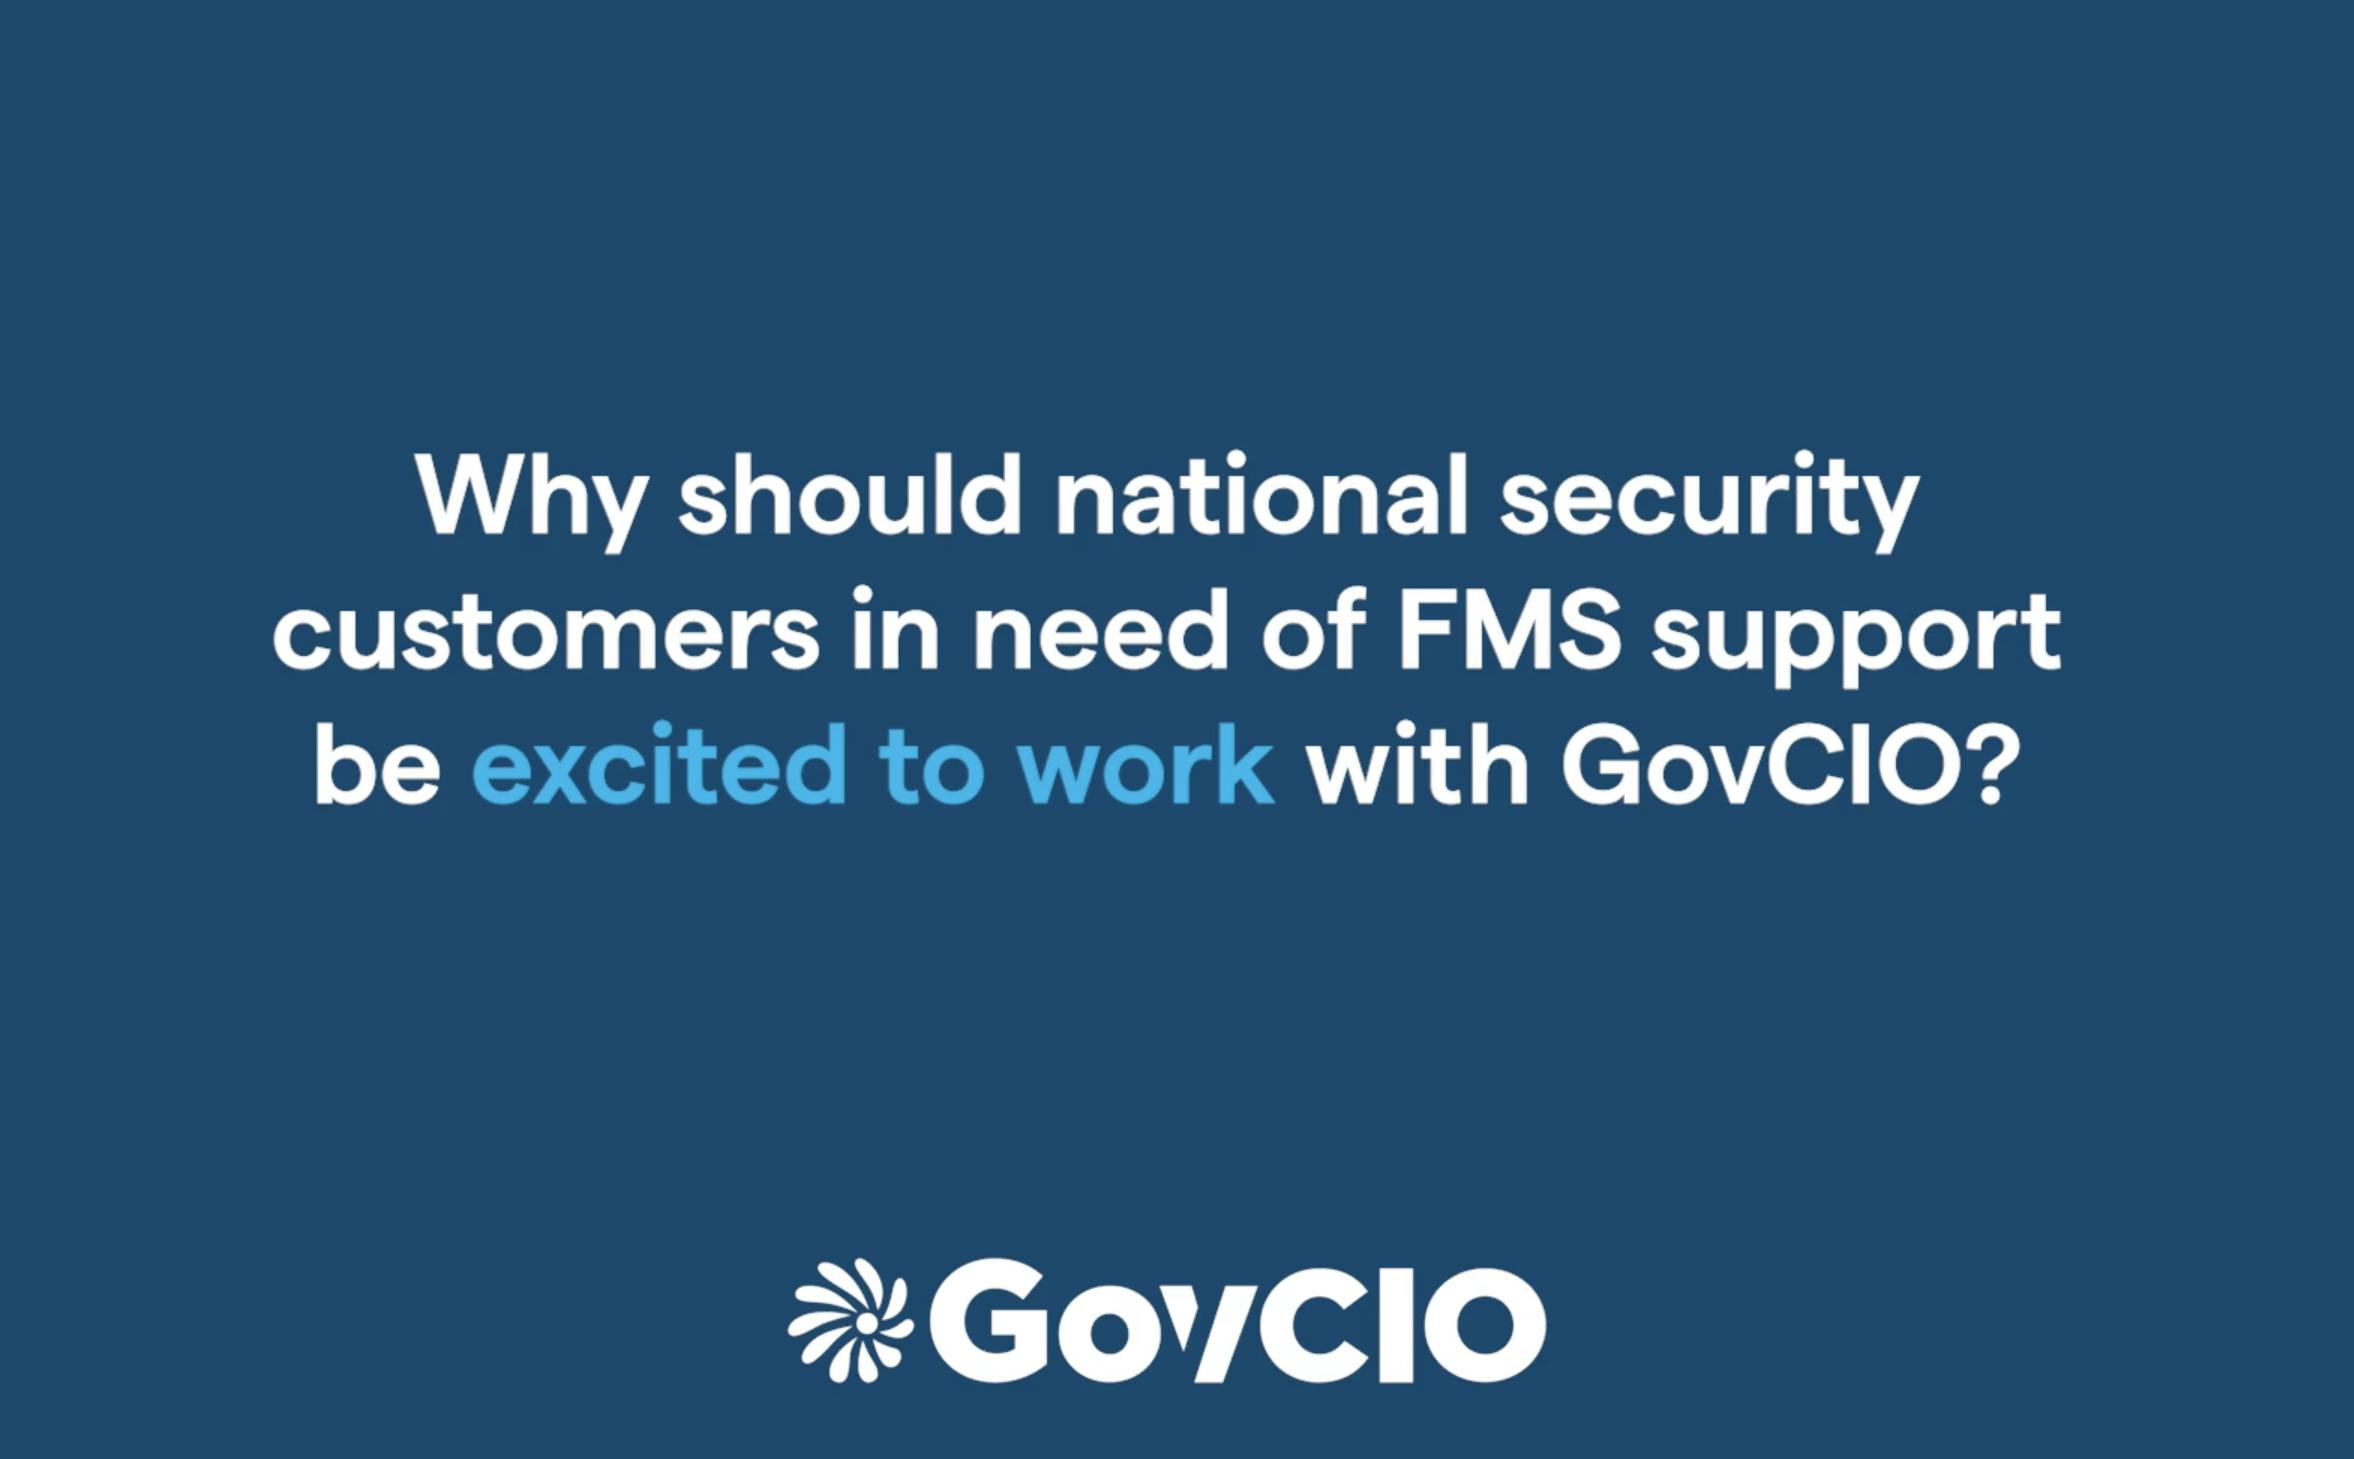 Blue block with words in light blue and white that say "Why should national security customers in need of FMS support be excited to work with GovCIO?"